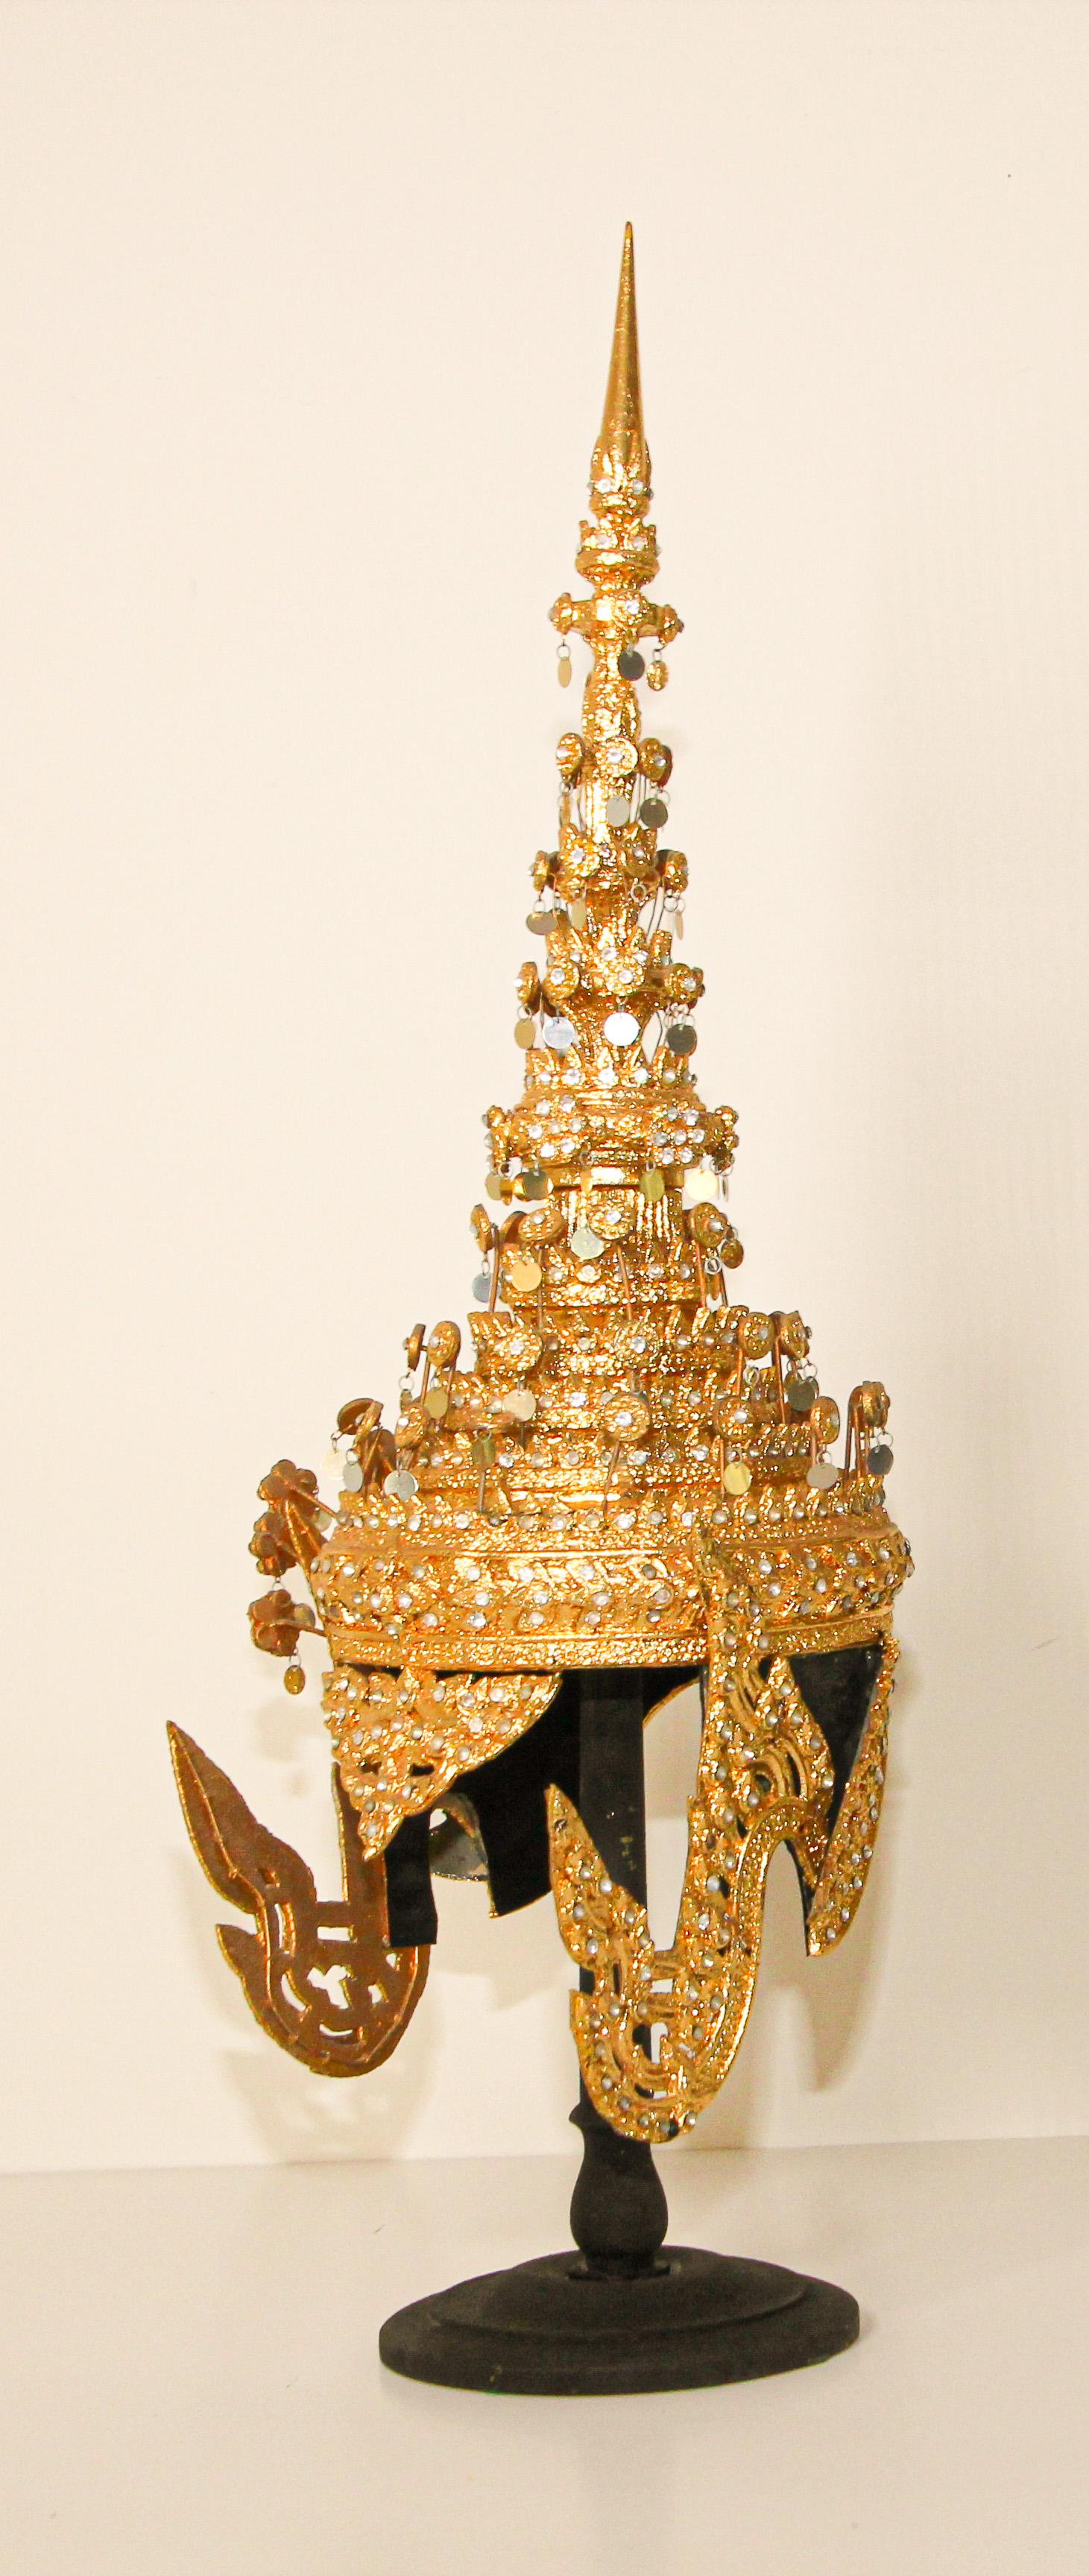 Ceremonial Thai headdress usually worn for wedding or religious ceremonies.
Hand-crafted in Thailand.
Gilt Thai Ceremonial Headdress circa 20th century.
A traditionally modeled design with a conical metal spire at the top, in gilt papier mâché,